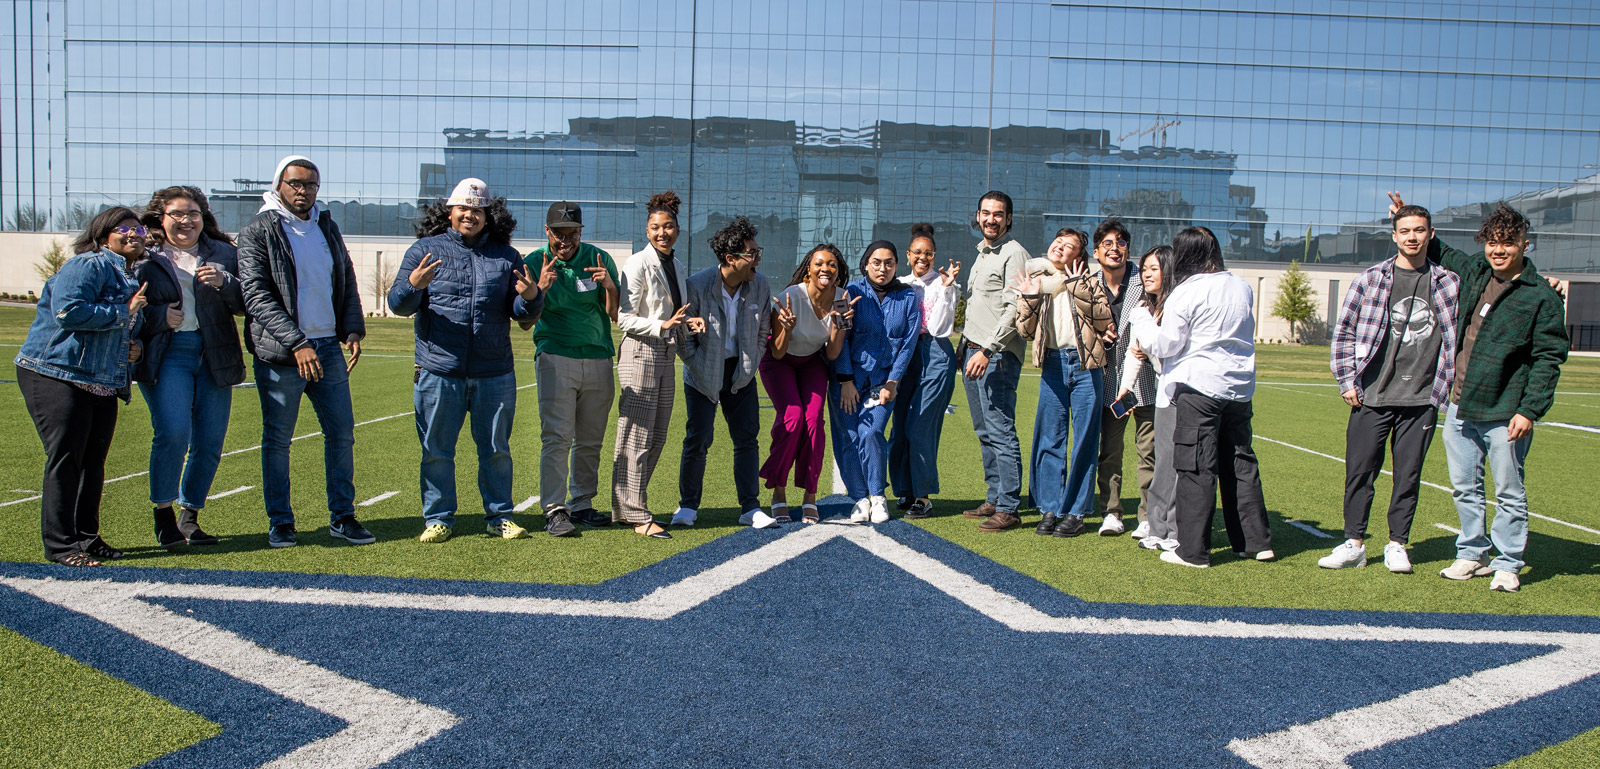 Students line up on the Dallas Cowboys star